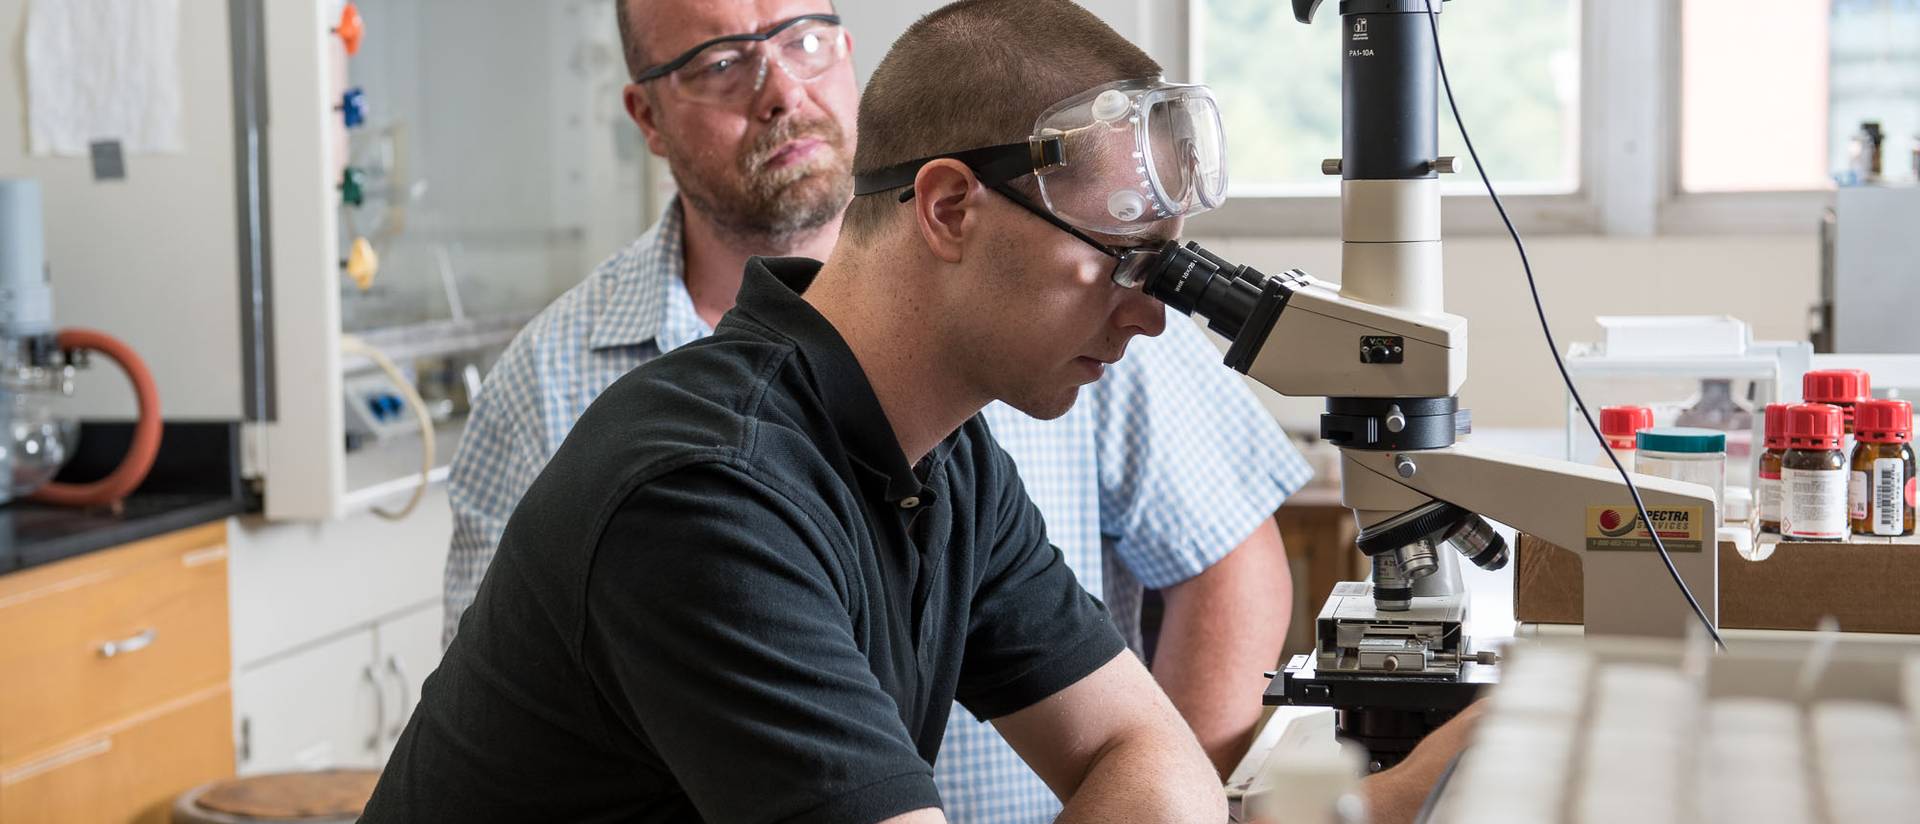 An instructor watches a student as they use a microscope.